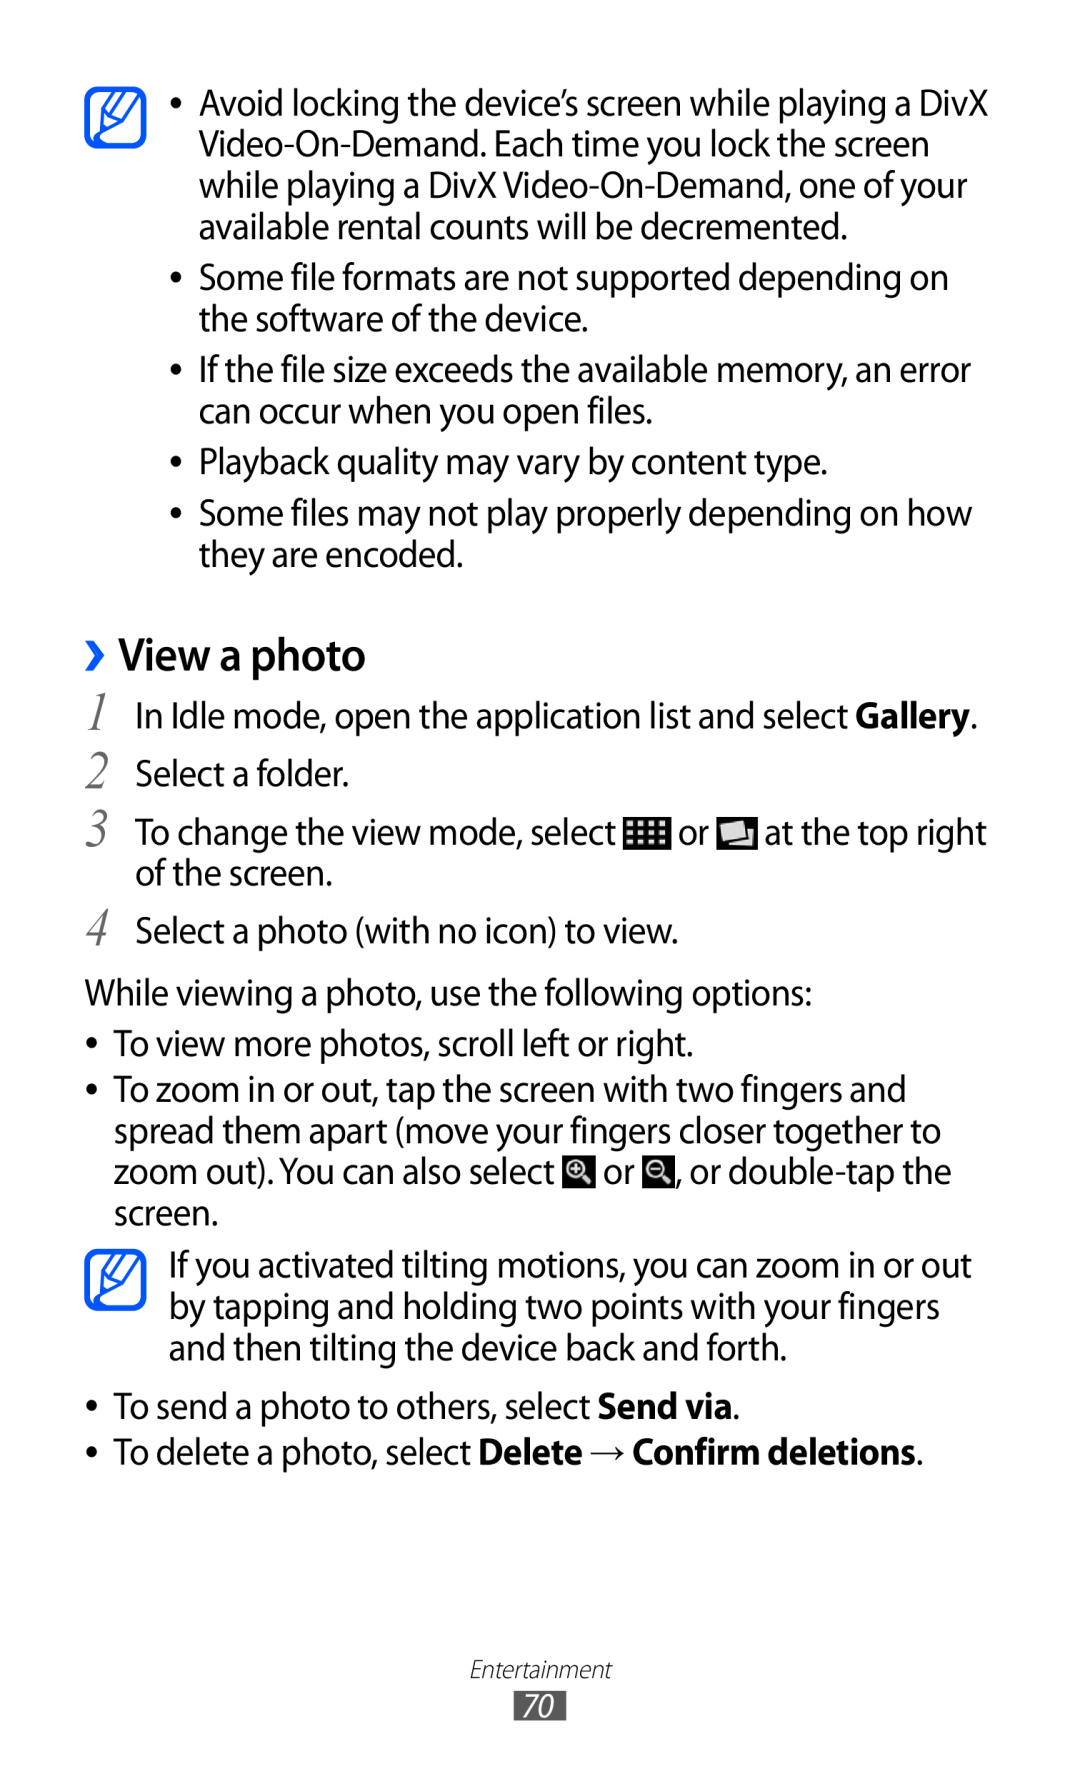 Samsung GT-I9070 user manual ››View a photo 